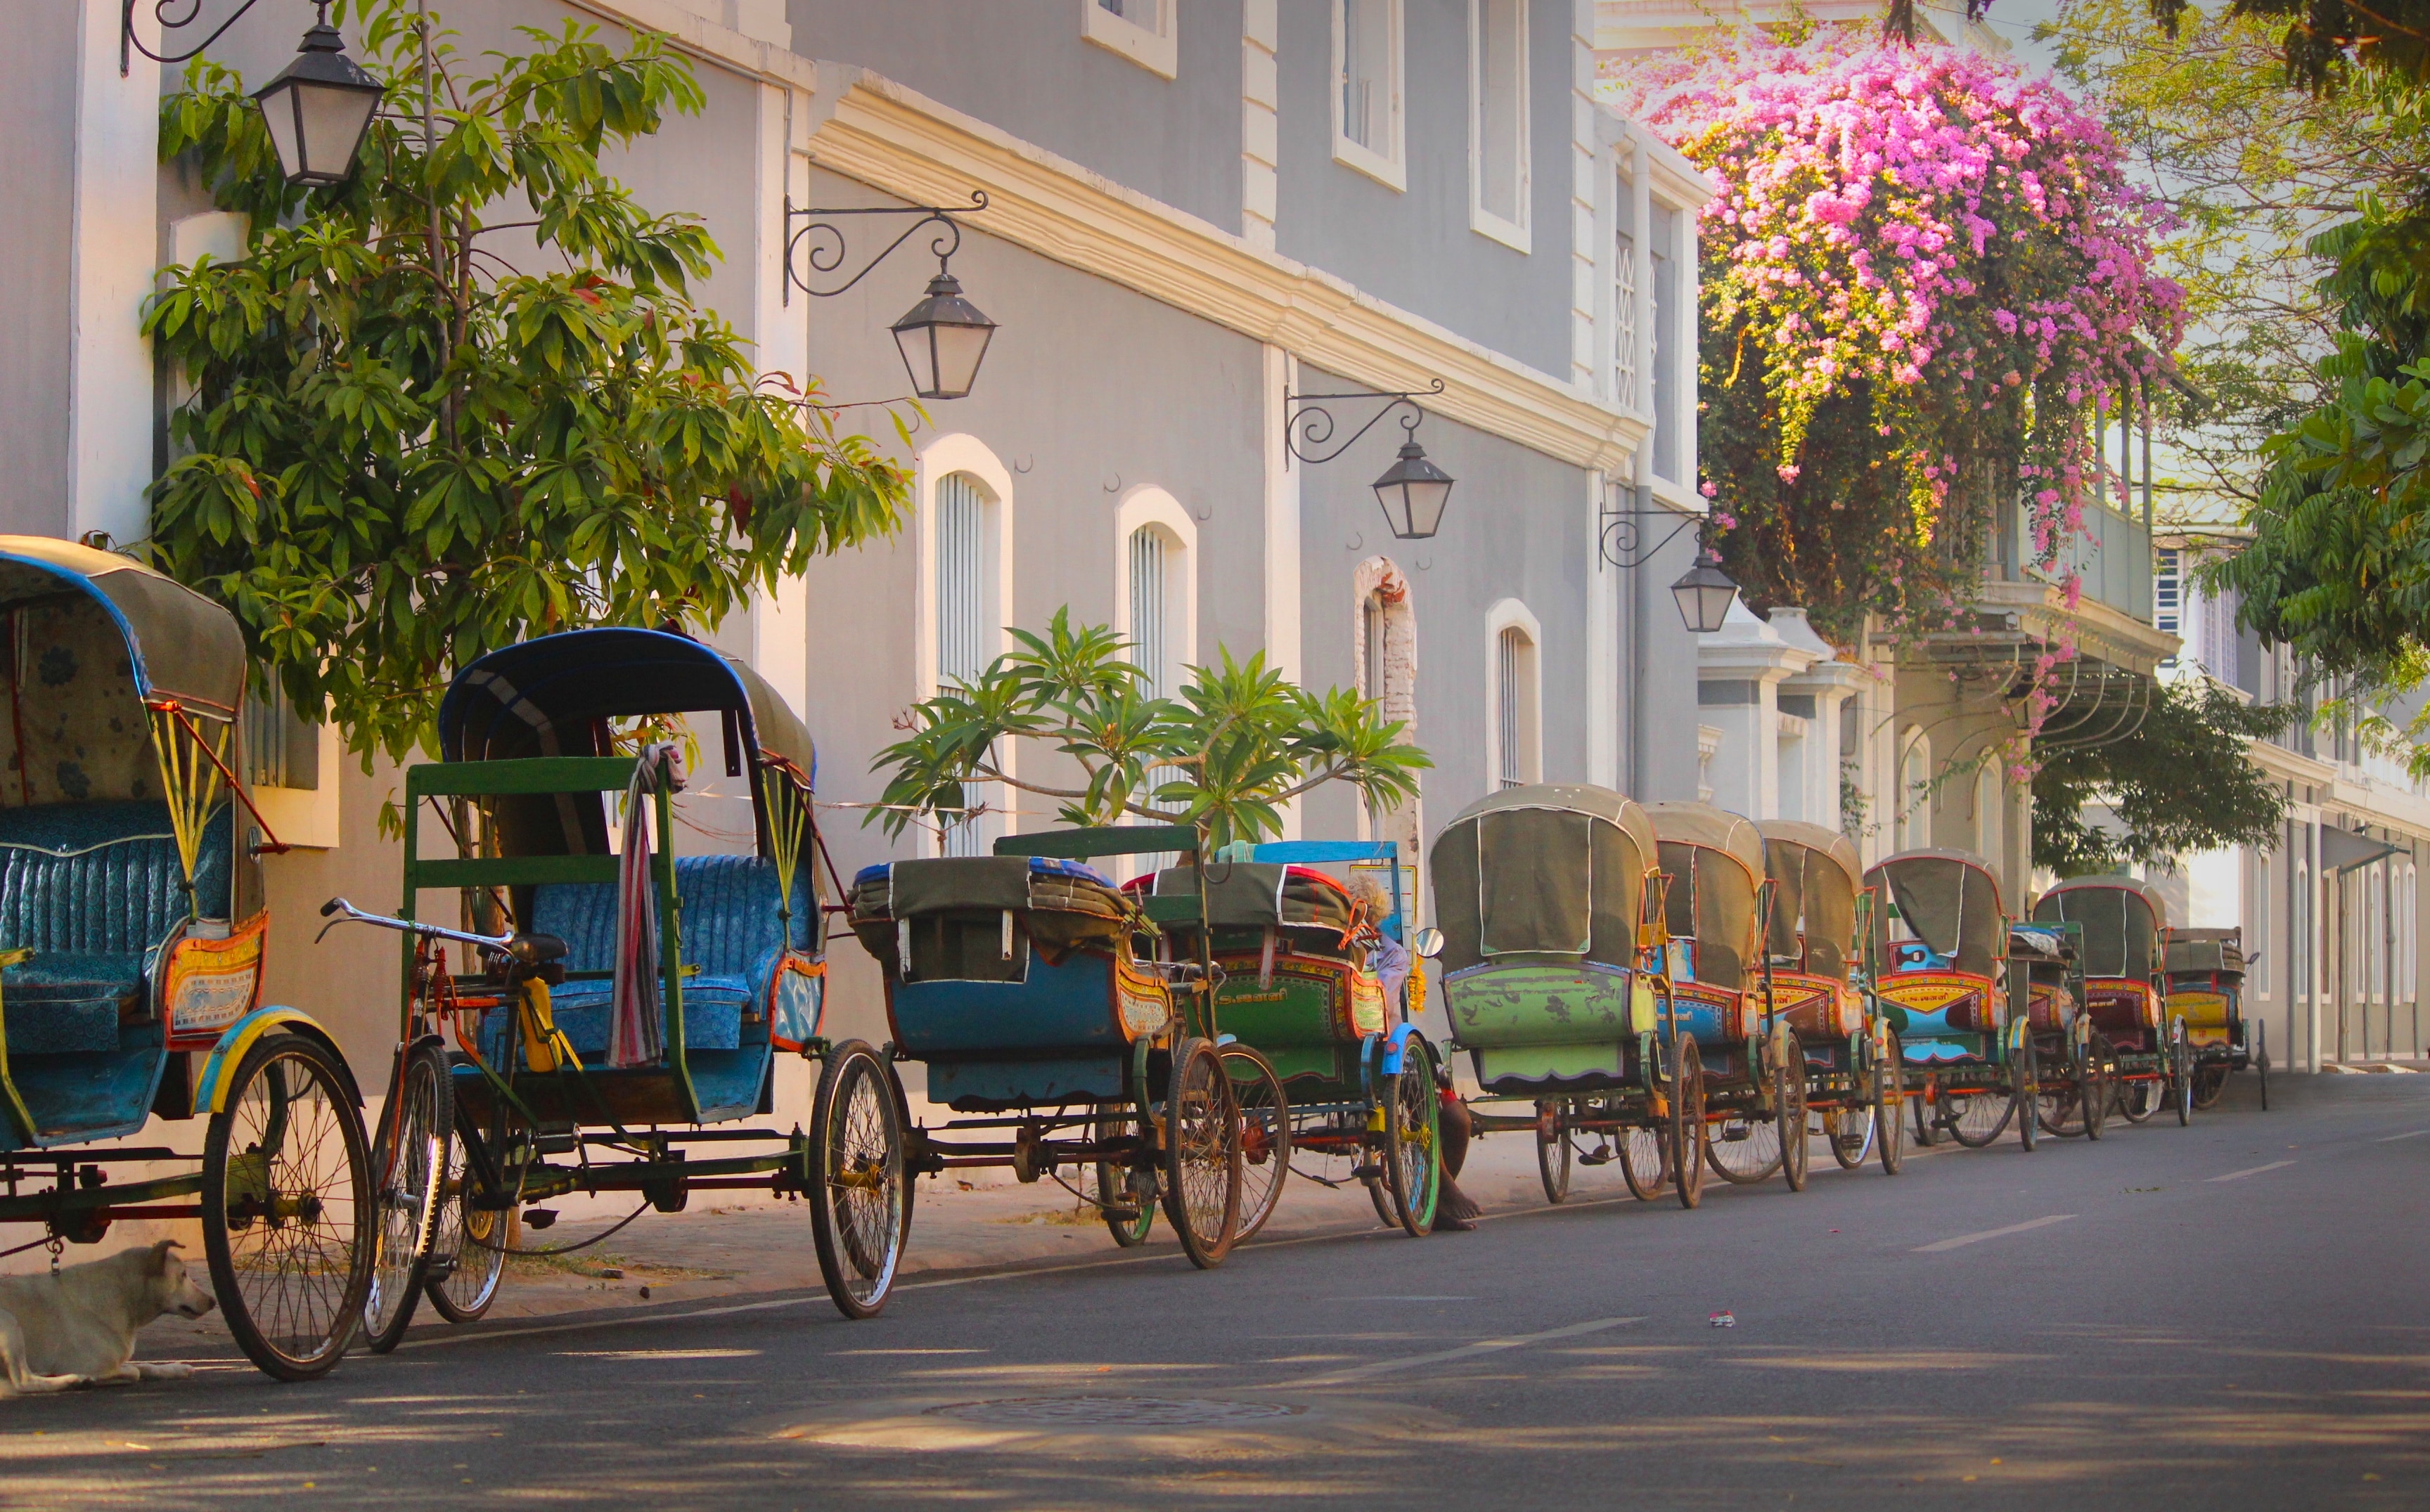 Why should you plan a visit to the city of Pondicherry?